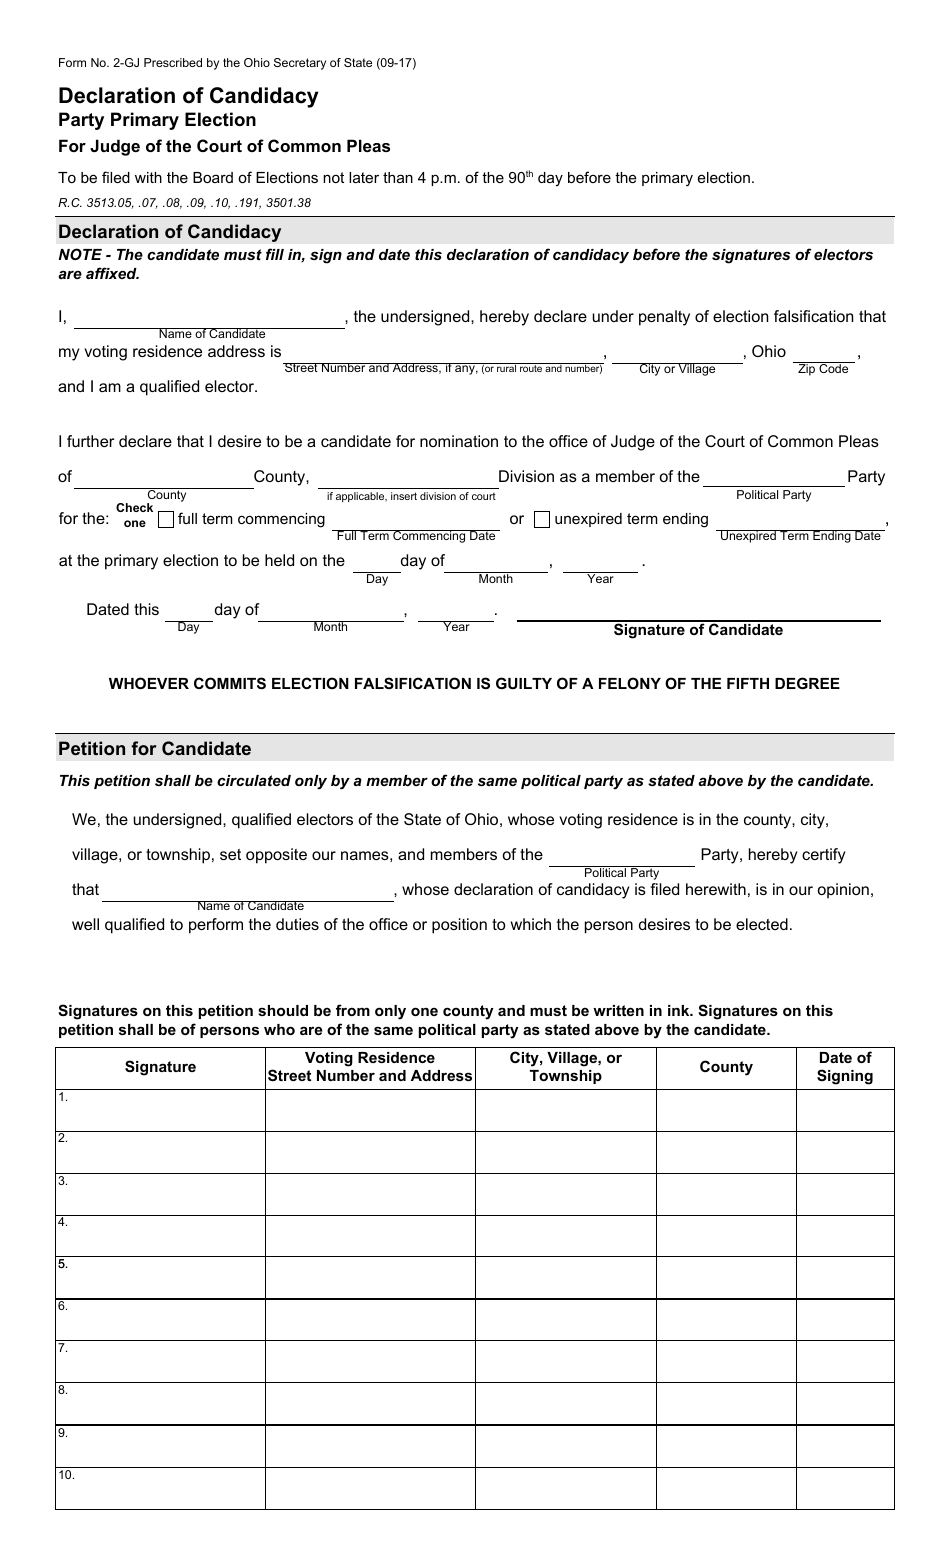 Form 2-GJ Declaration of Candidacy - Party Primary Election for Judge of the Court of Common Pleas - Ohio, Page 1